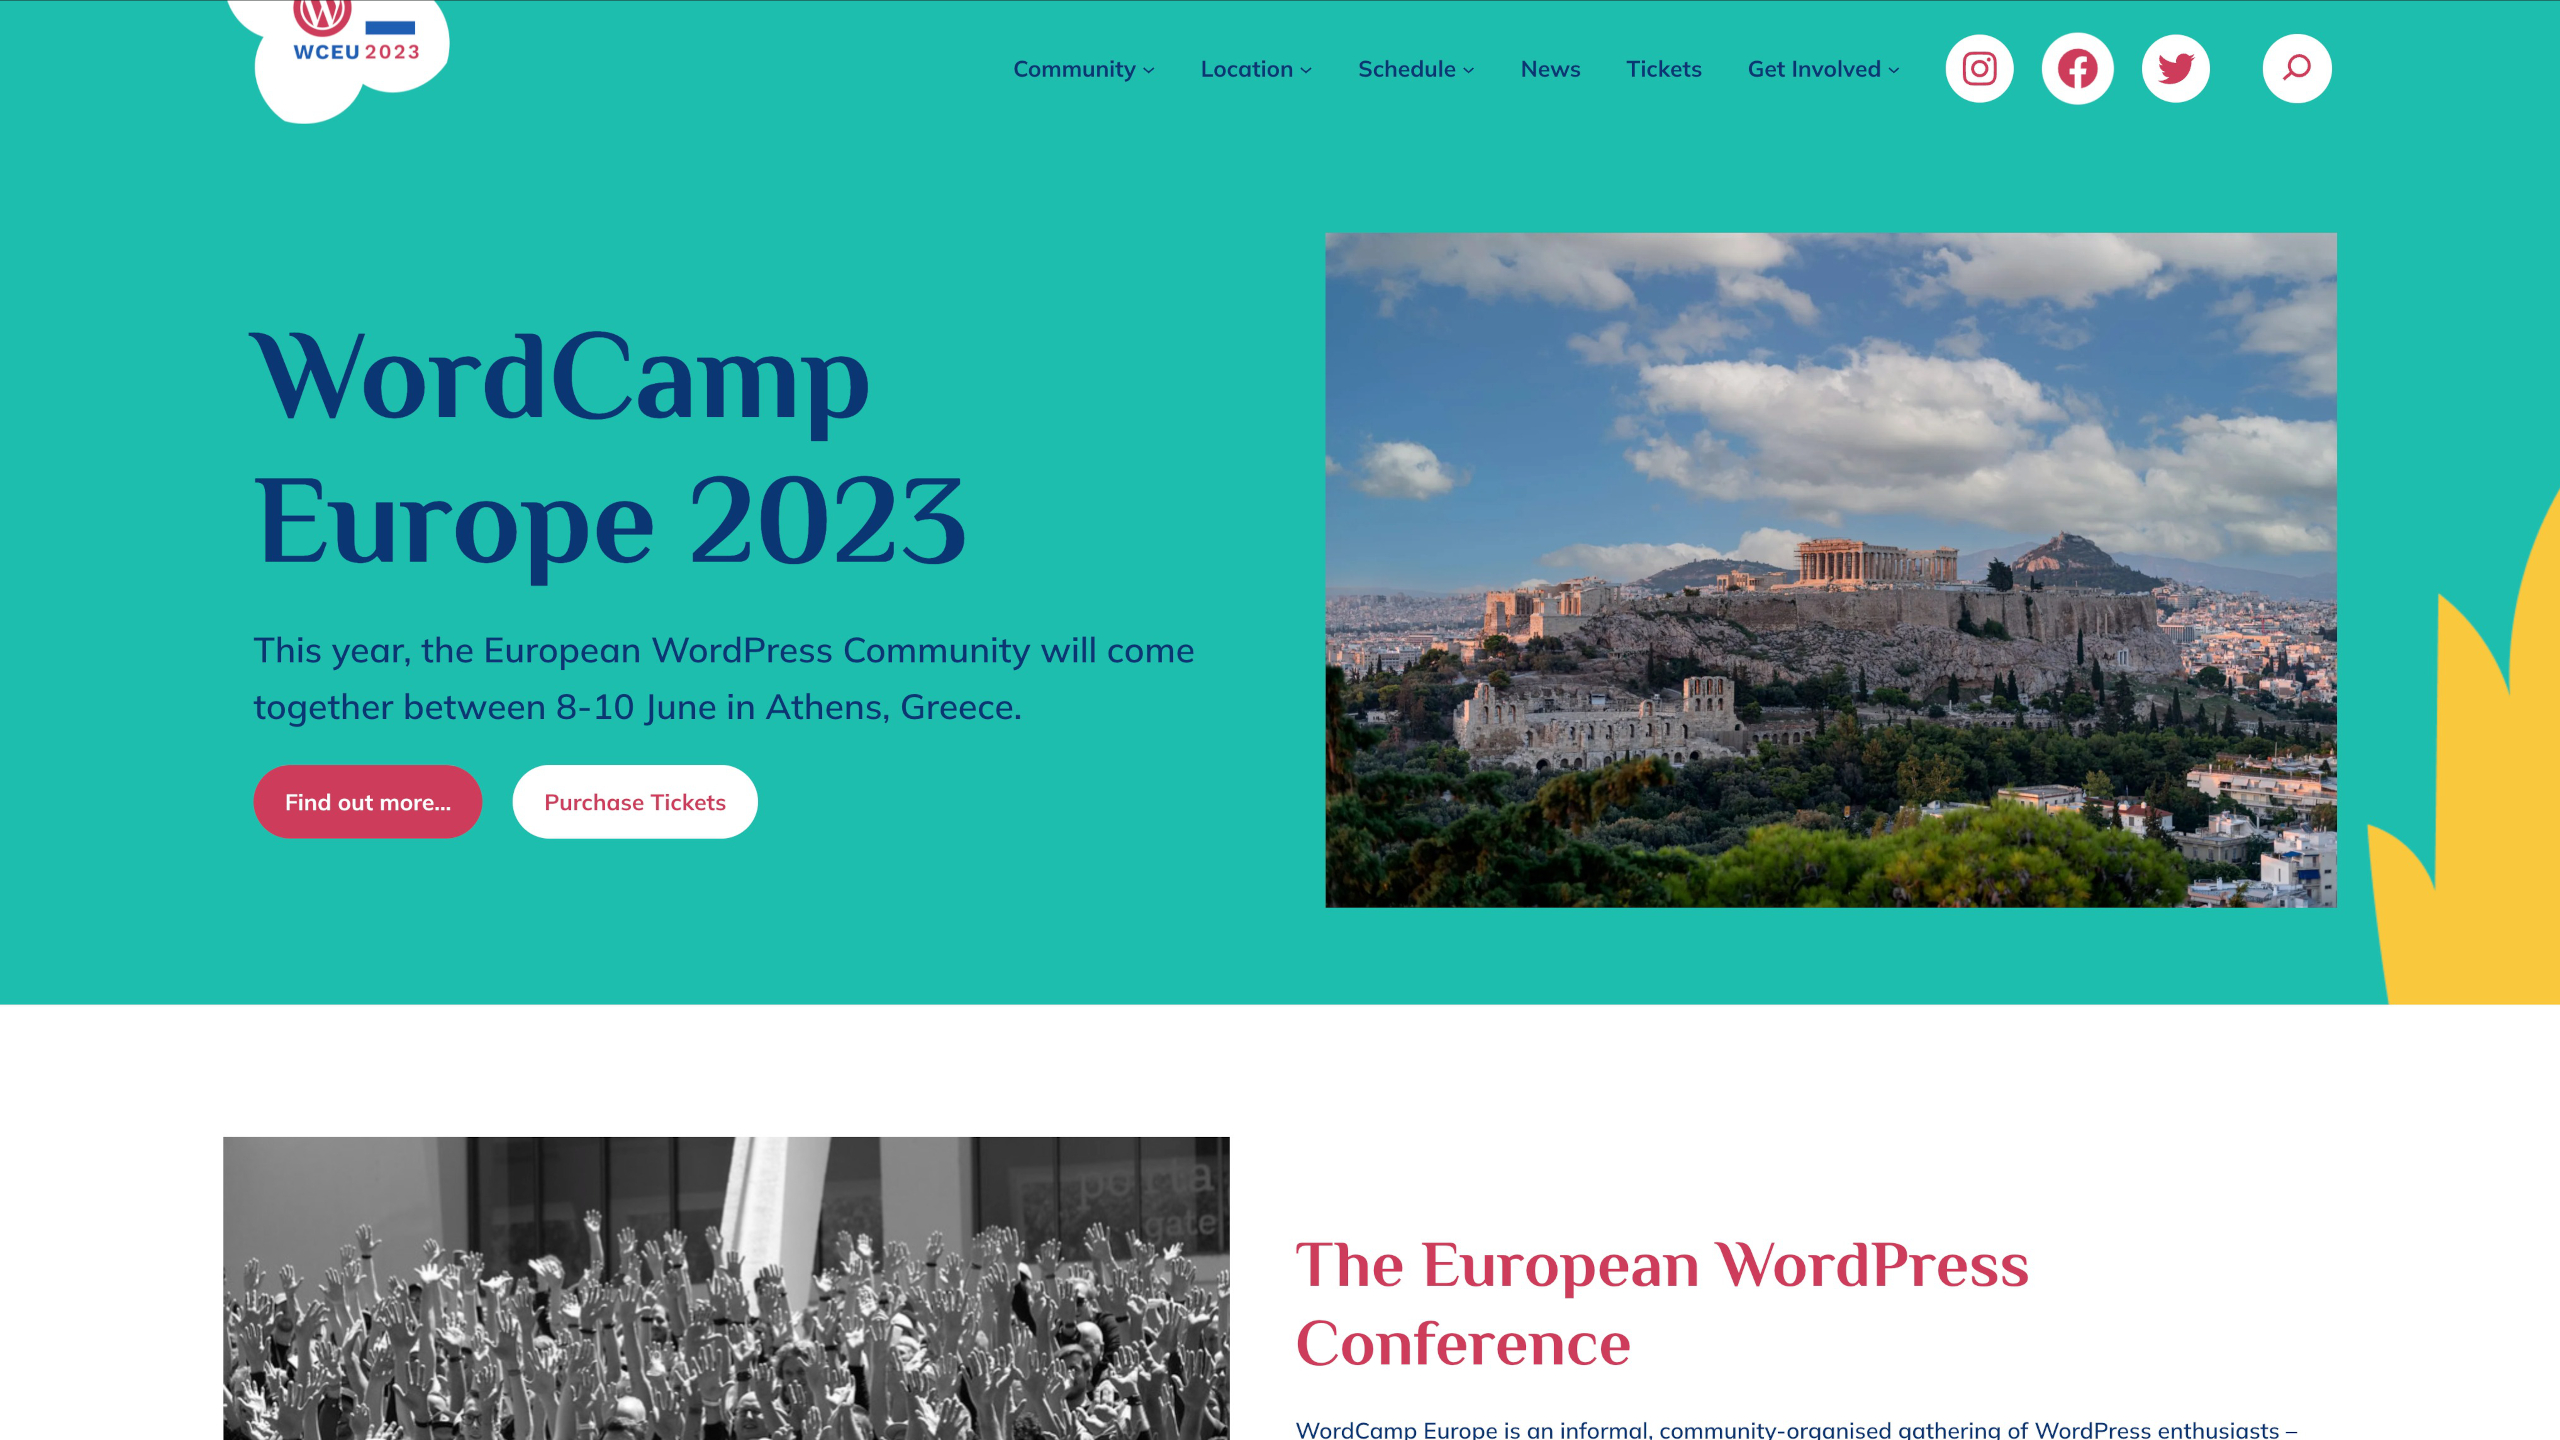 Are you attending WCEU 2023?